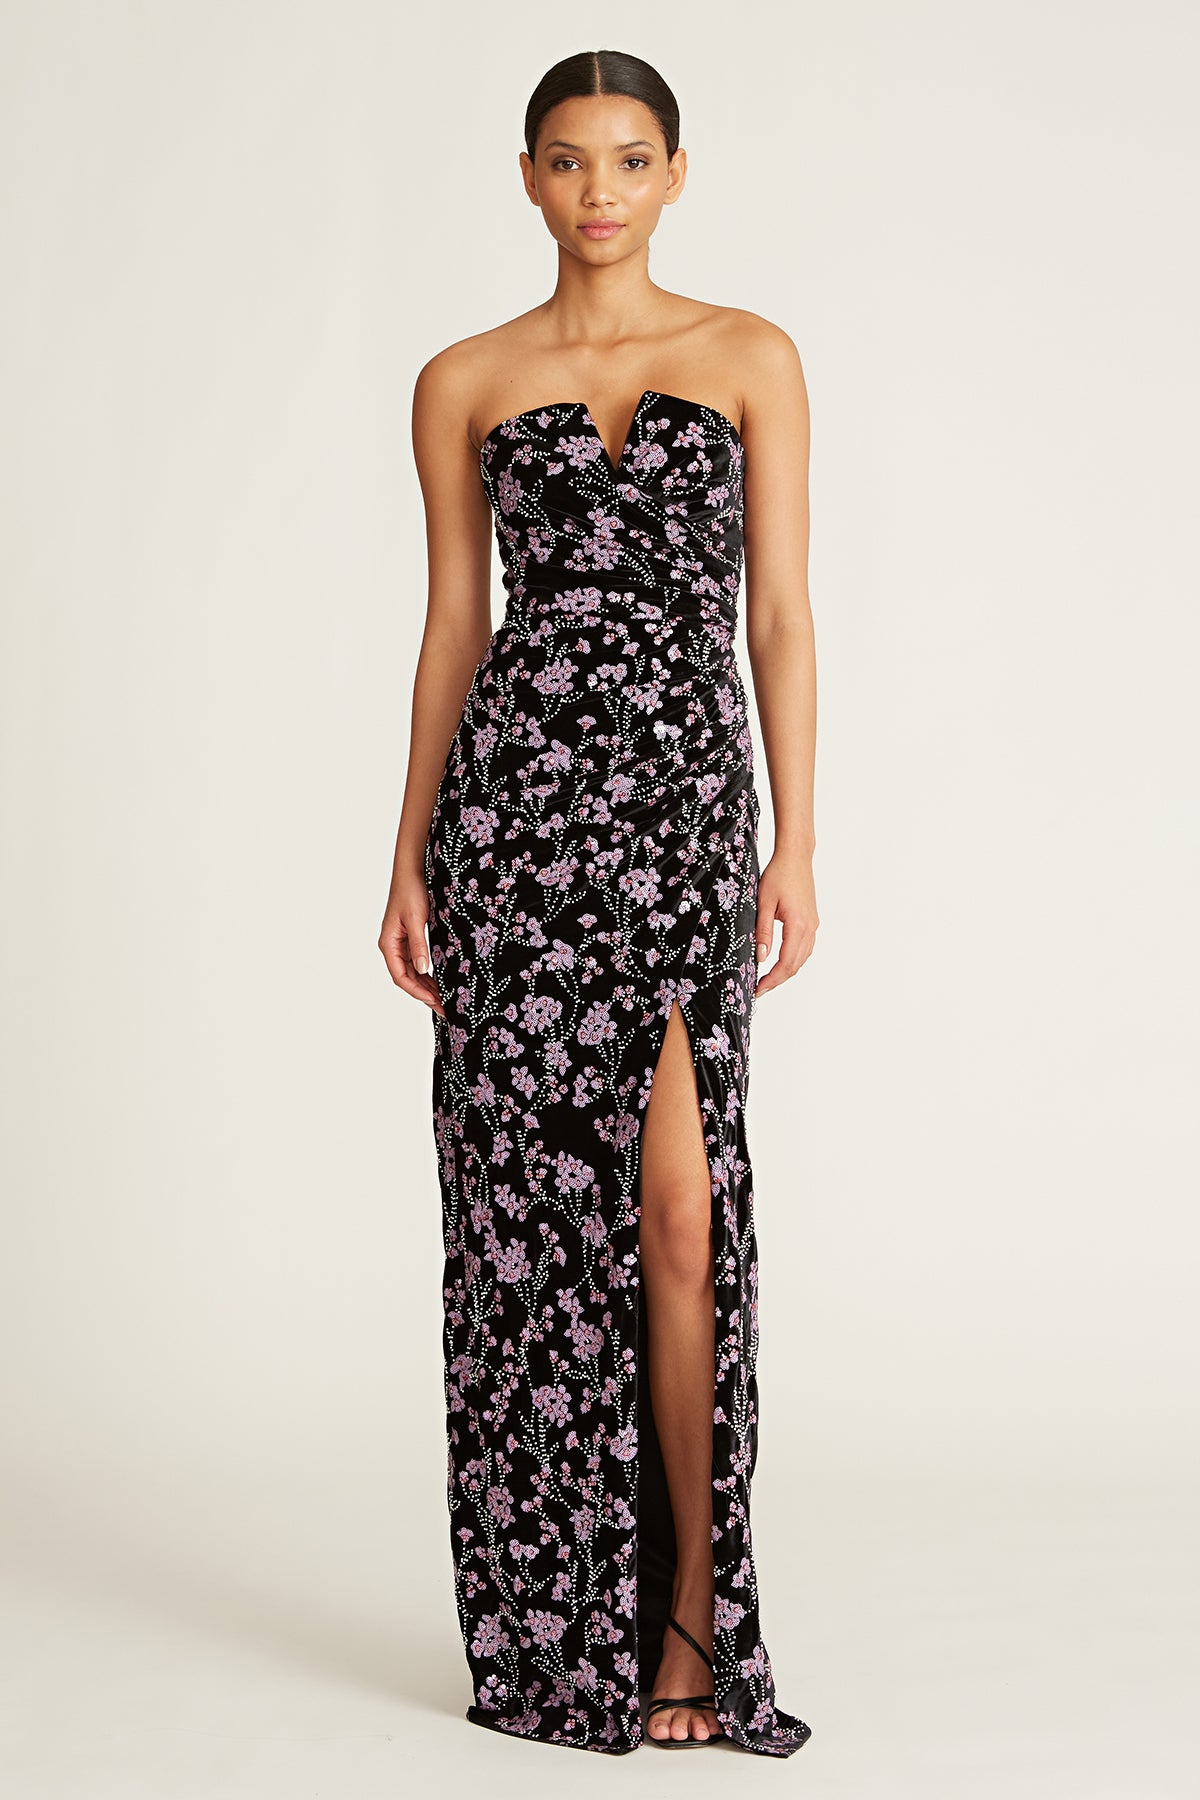 Theia - Melody Strapless Gown - Black/ Soft Pink